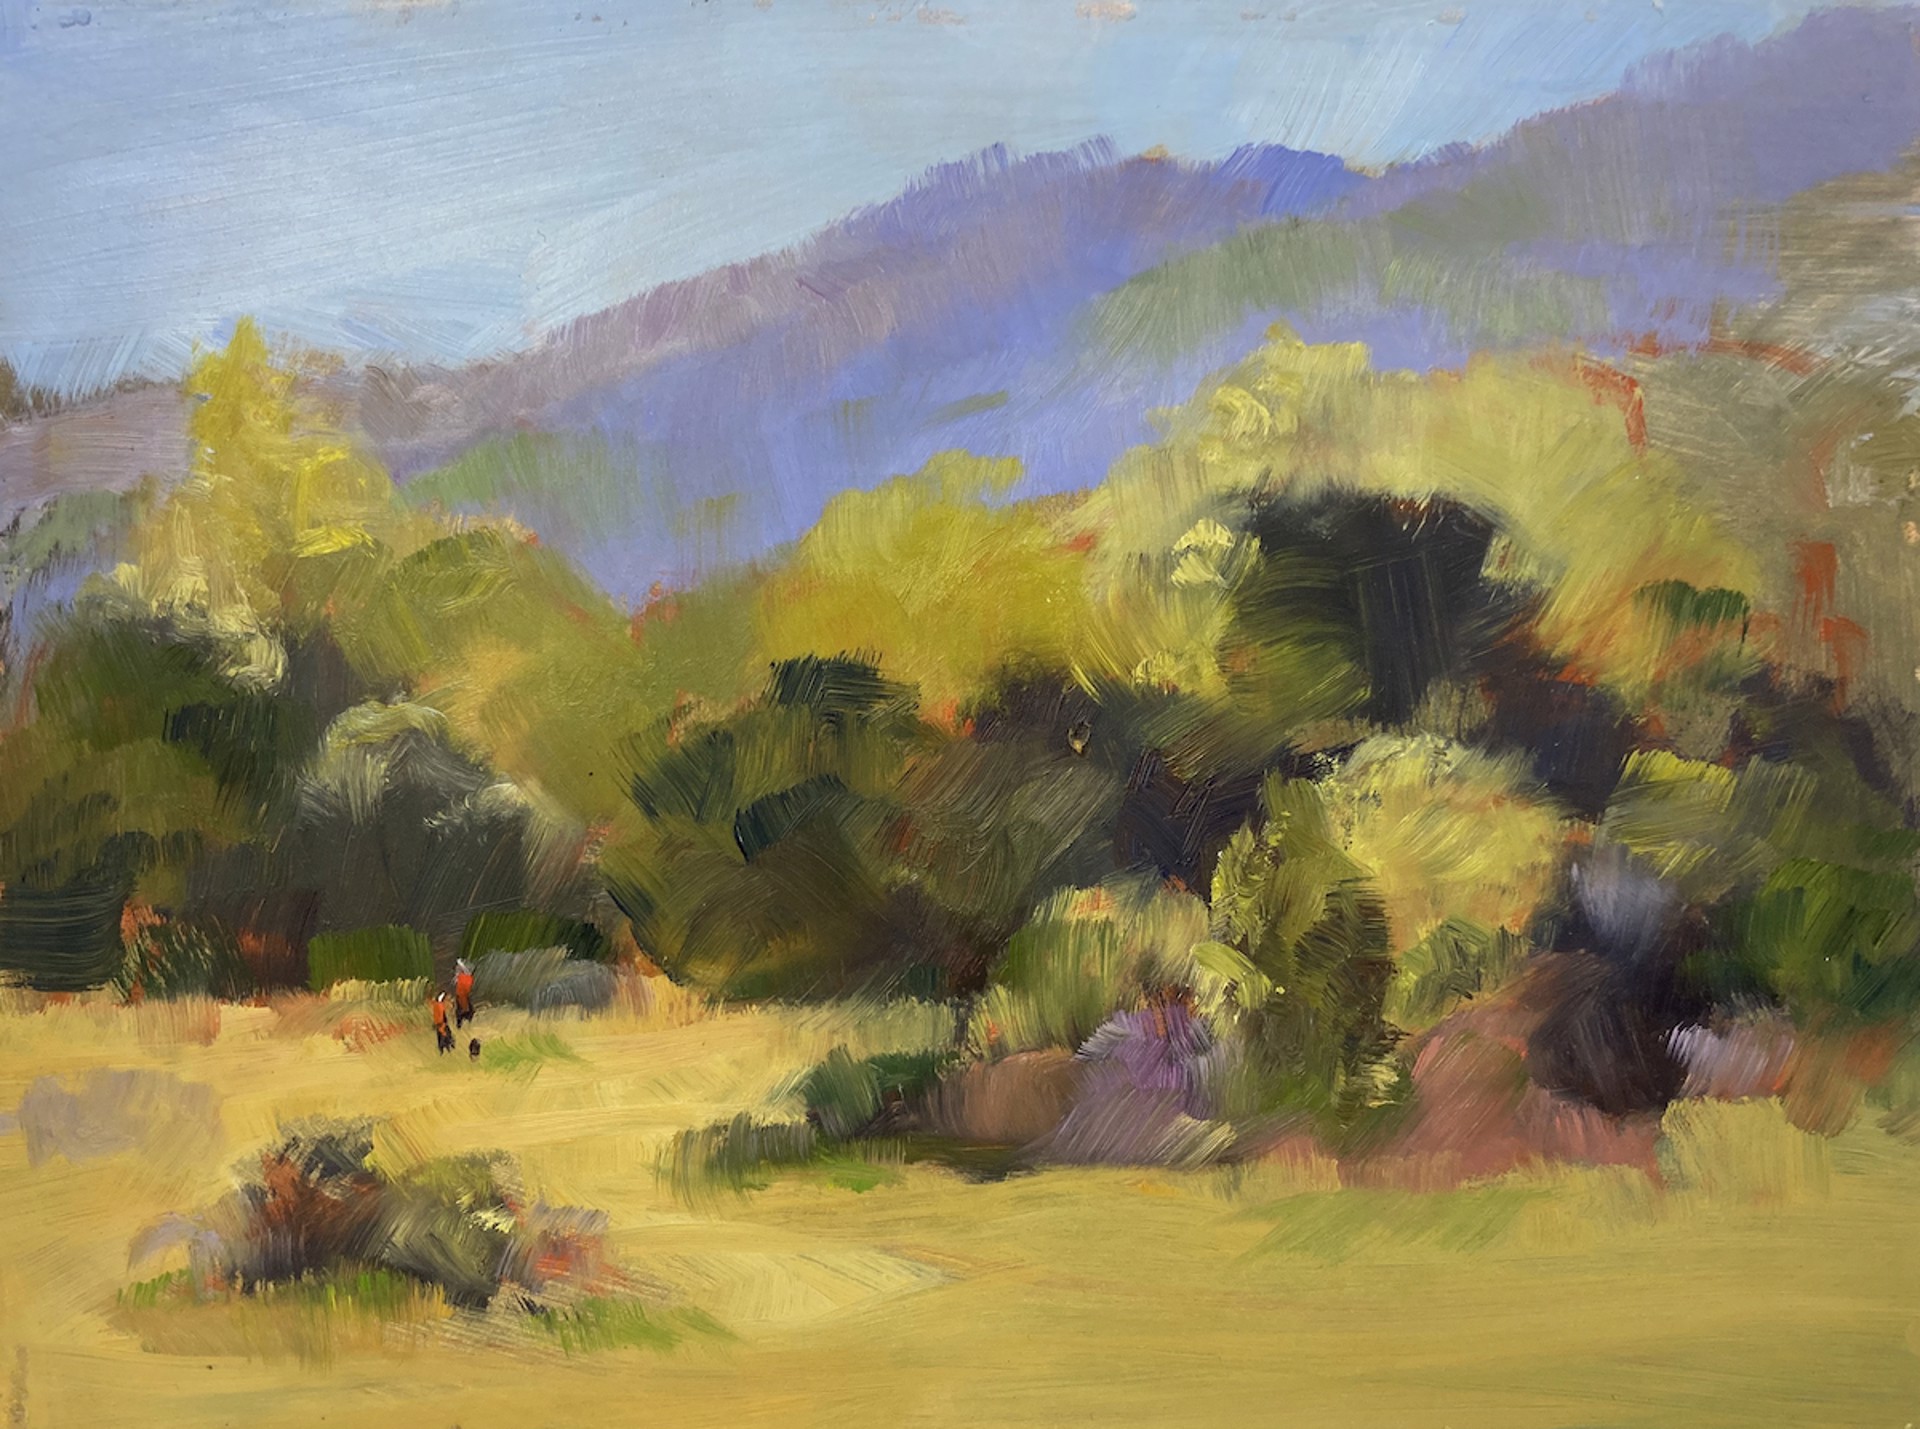 Purple Mountains and the Dog at Garland Ranch by Cornelia Emery